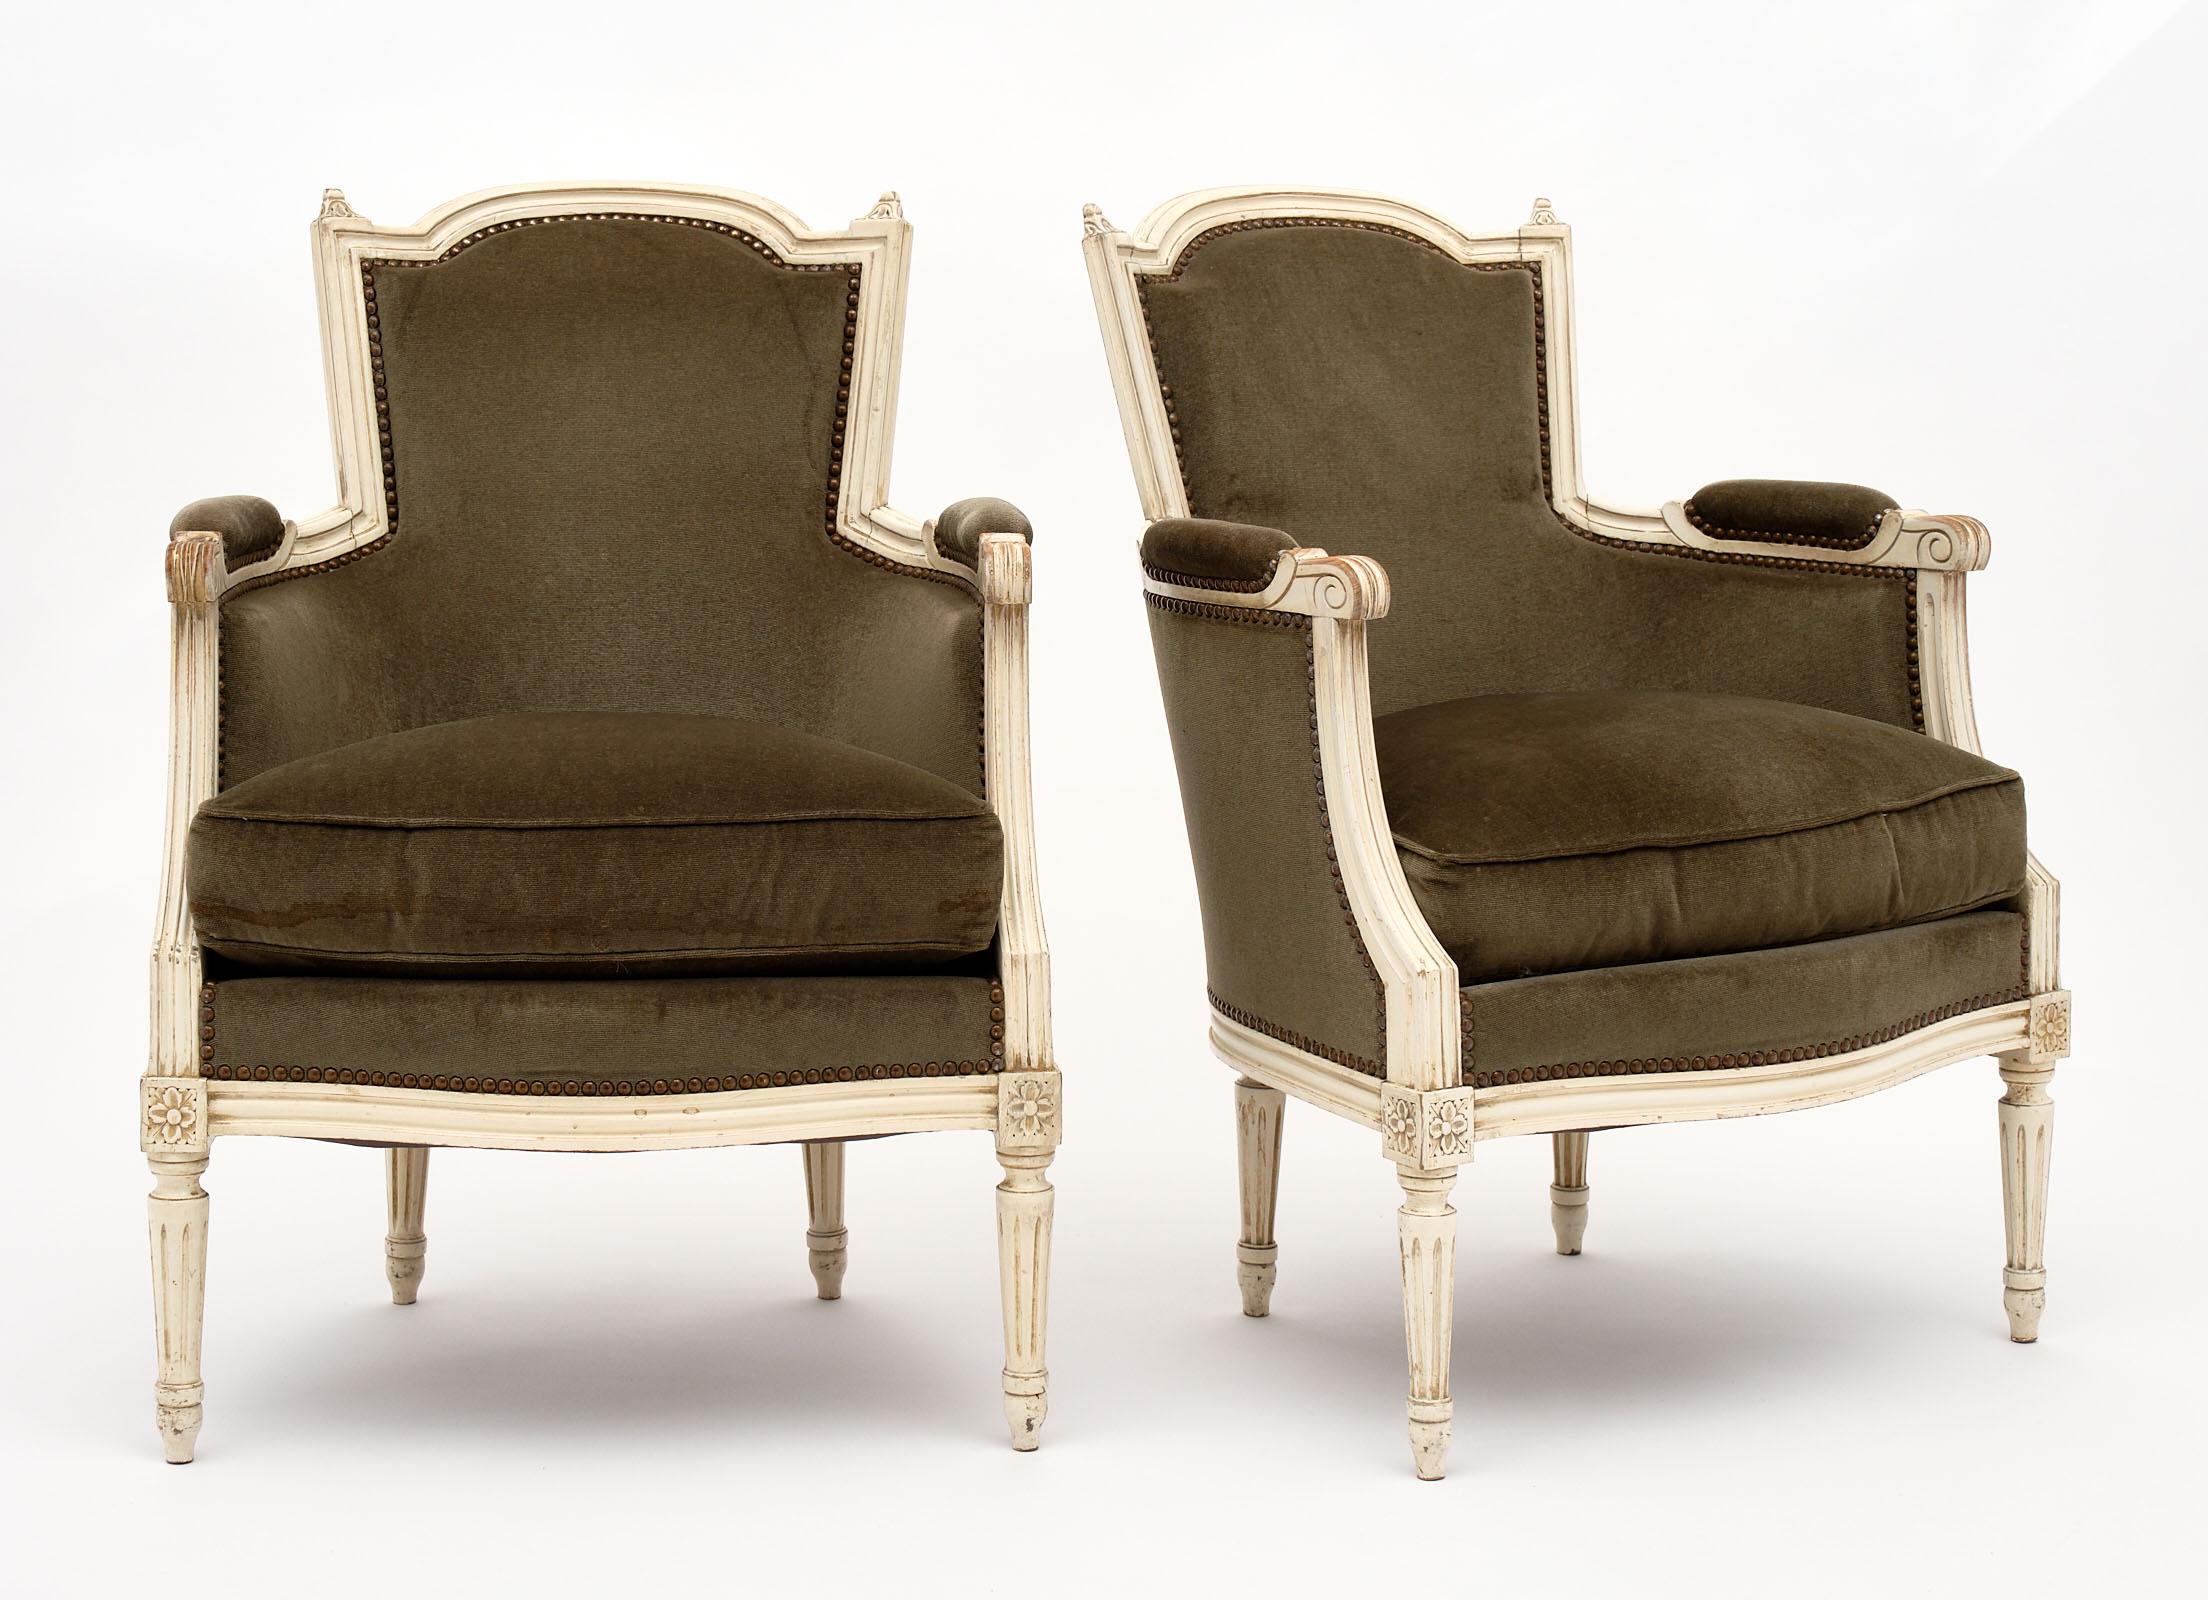 Louis XVI style French antique bergères with hand-painted beech wood frames and original velvet upholstery in good condition. They are quite sturdy and add a beautiful, Classic element to any space. We love the green hue of the fabric as well.